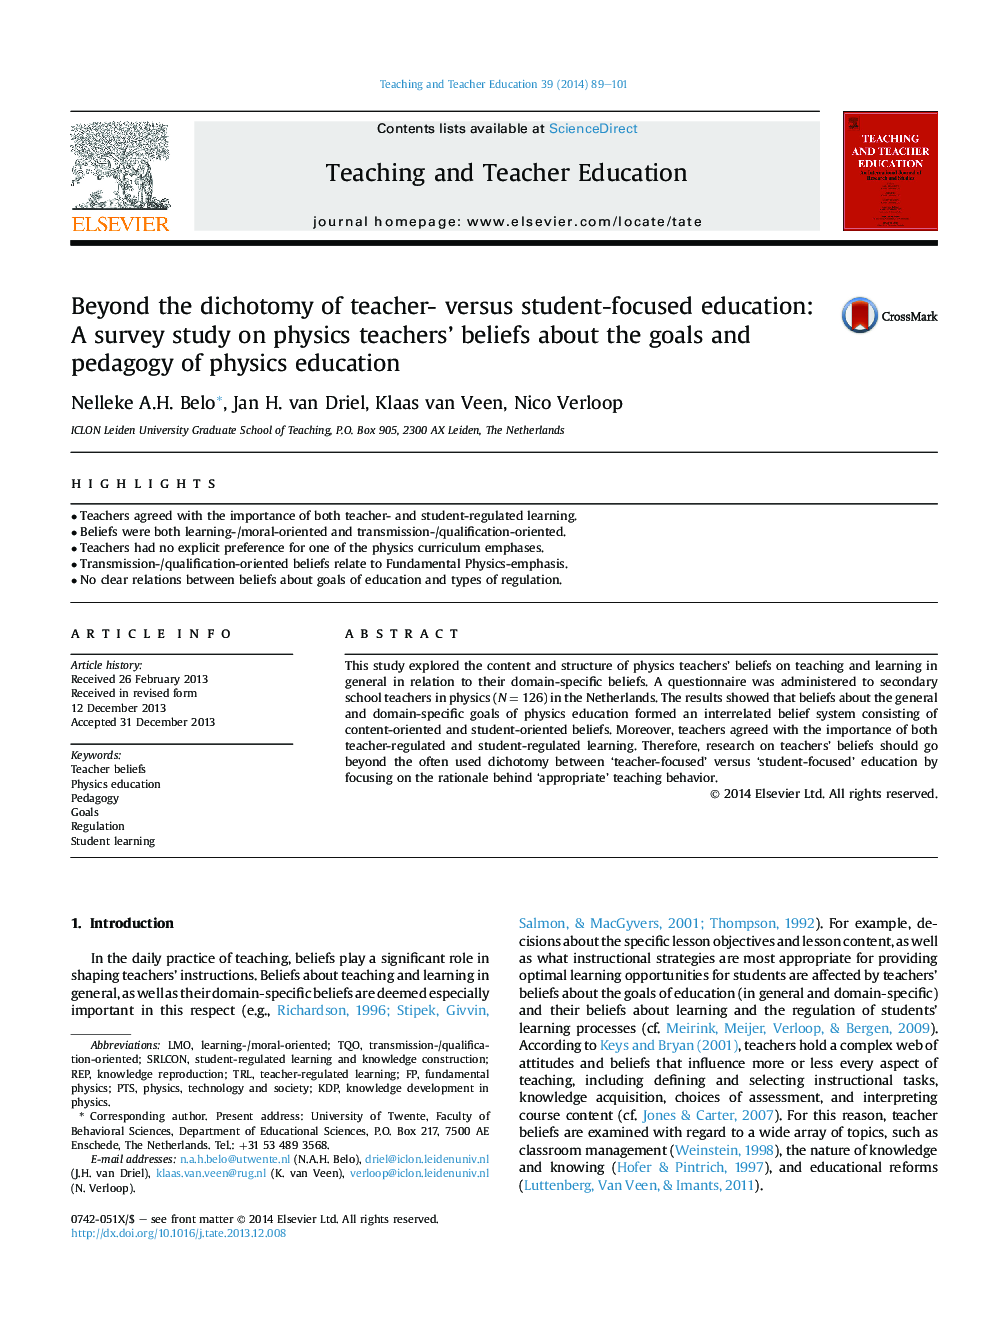 Beyond the dichotomy of teacher- versus student-focused education: A survey study on physics teachers' beliefs about the goals and pedagogy of physics education